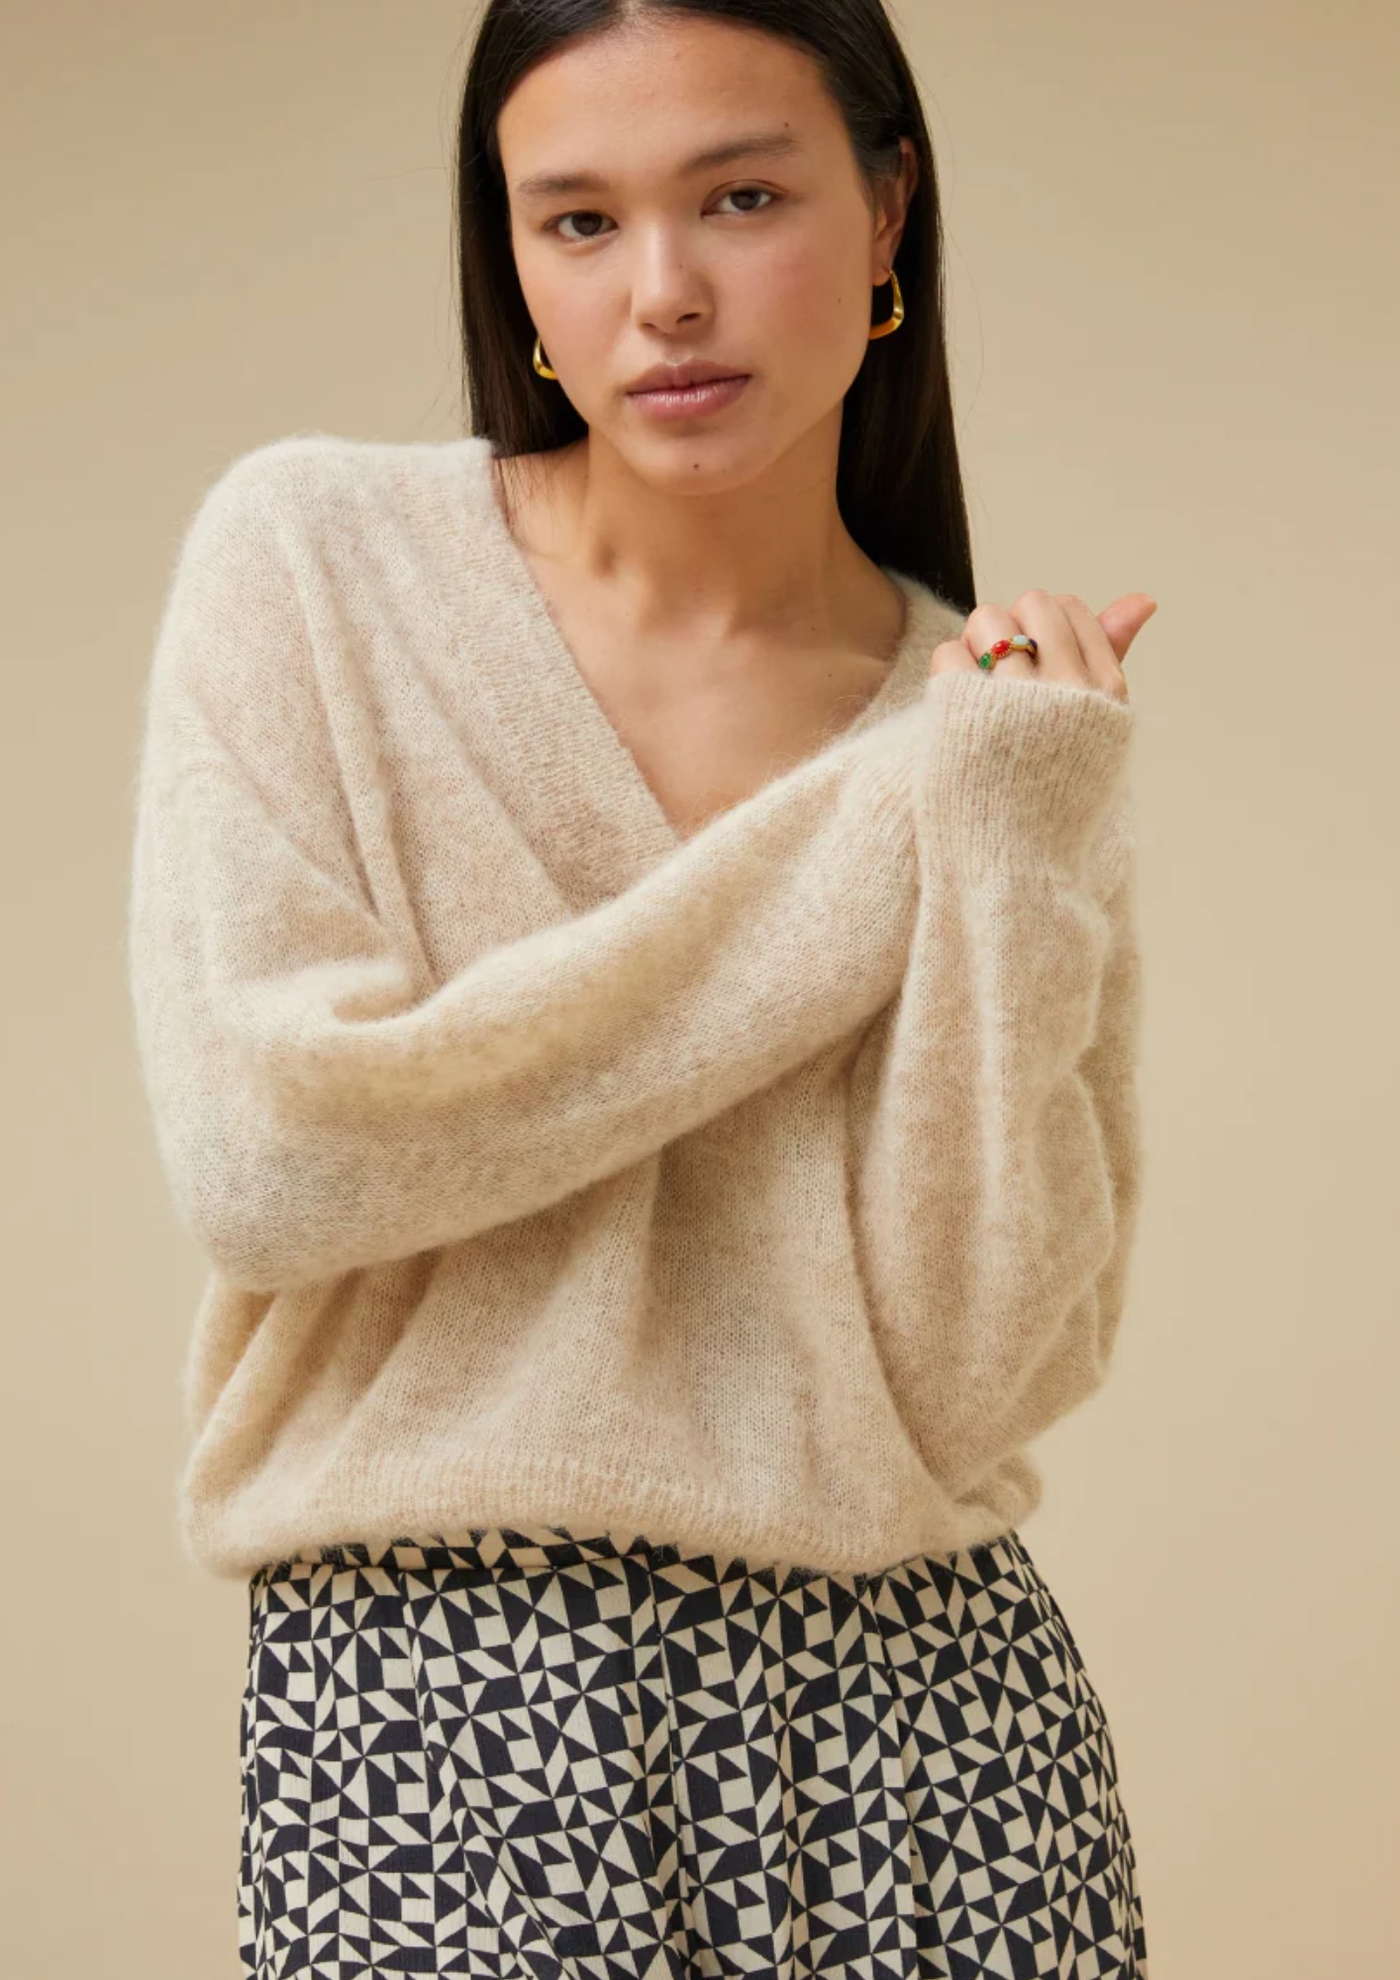 By Bar | Izzy Pullover Sand